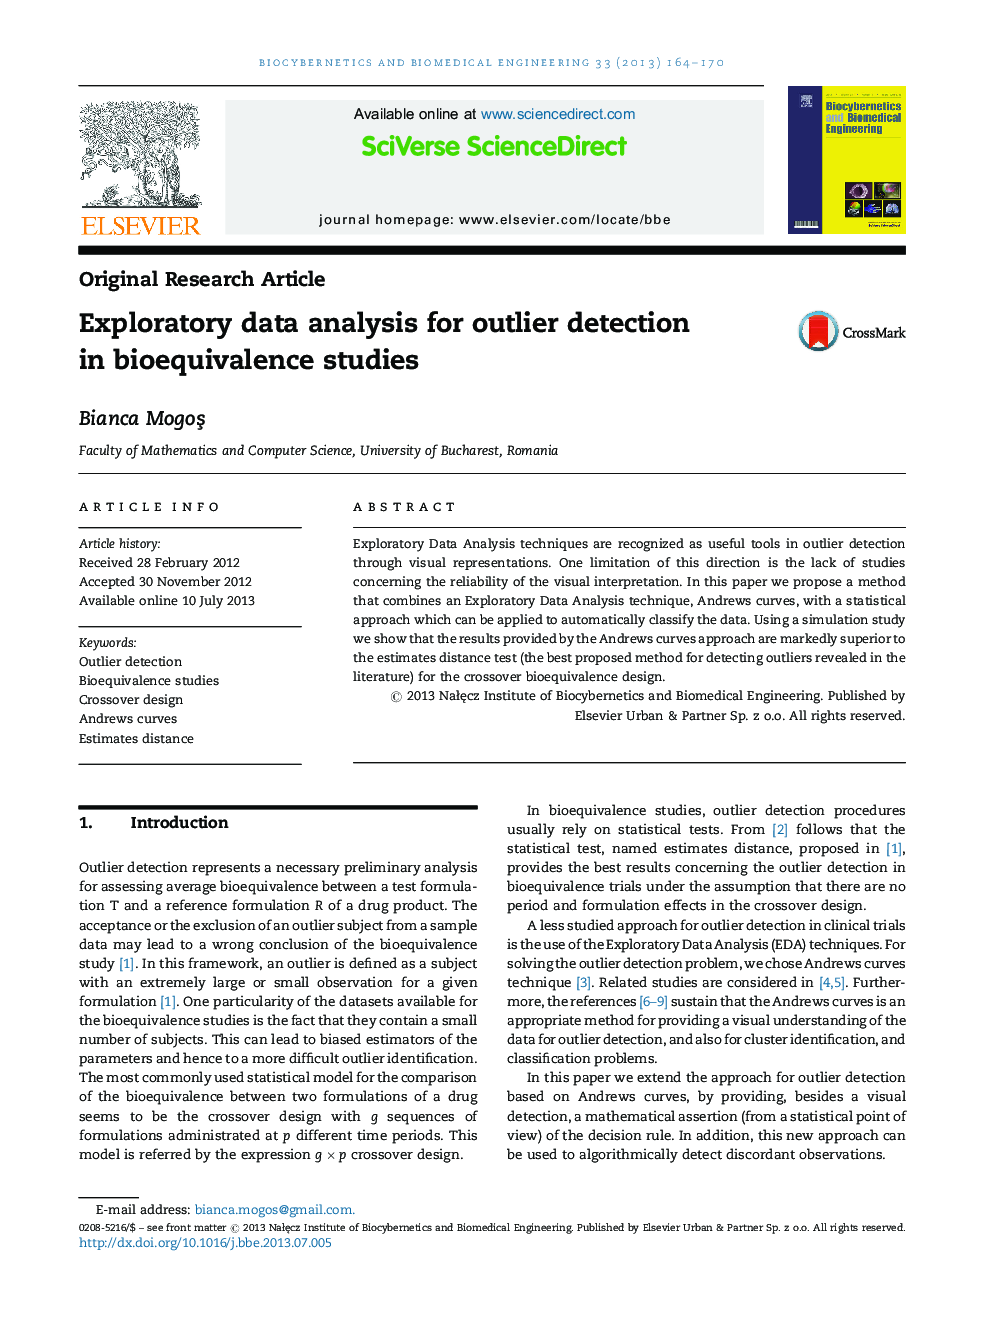 Exploratory data analysis for outlier detection in bioequivalence studies